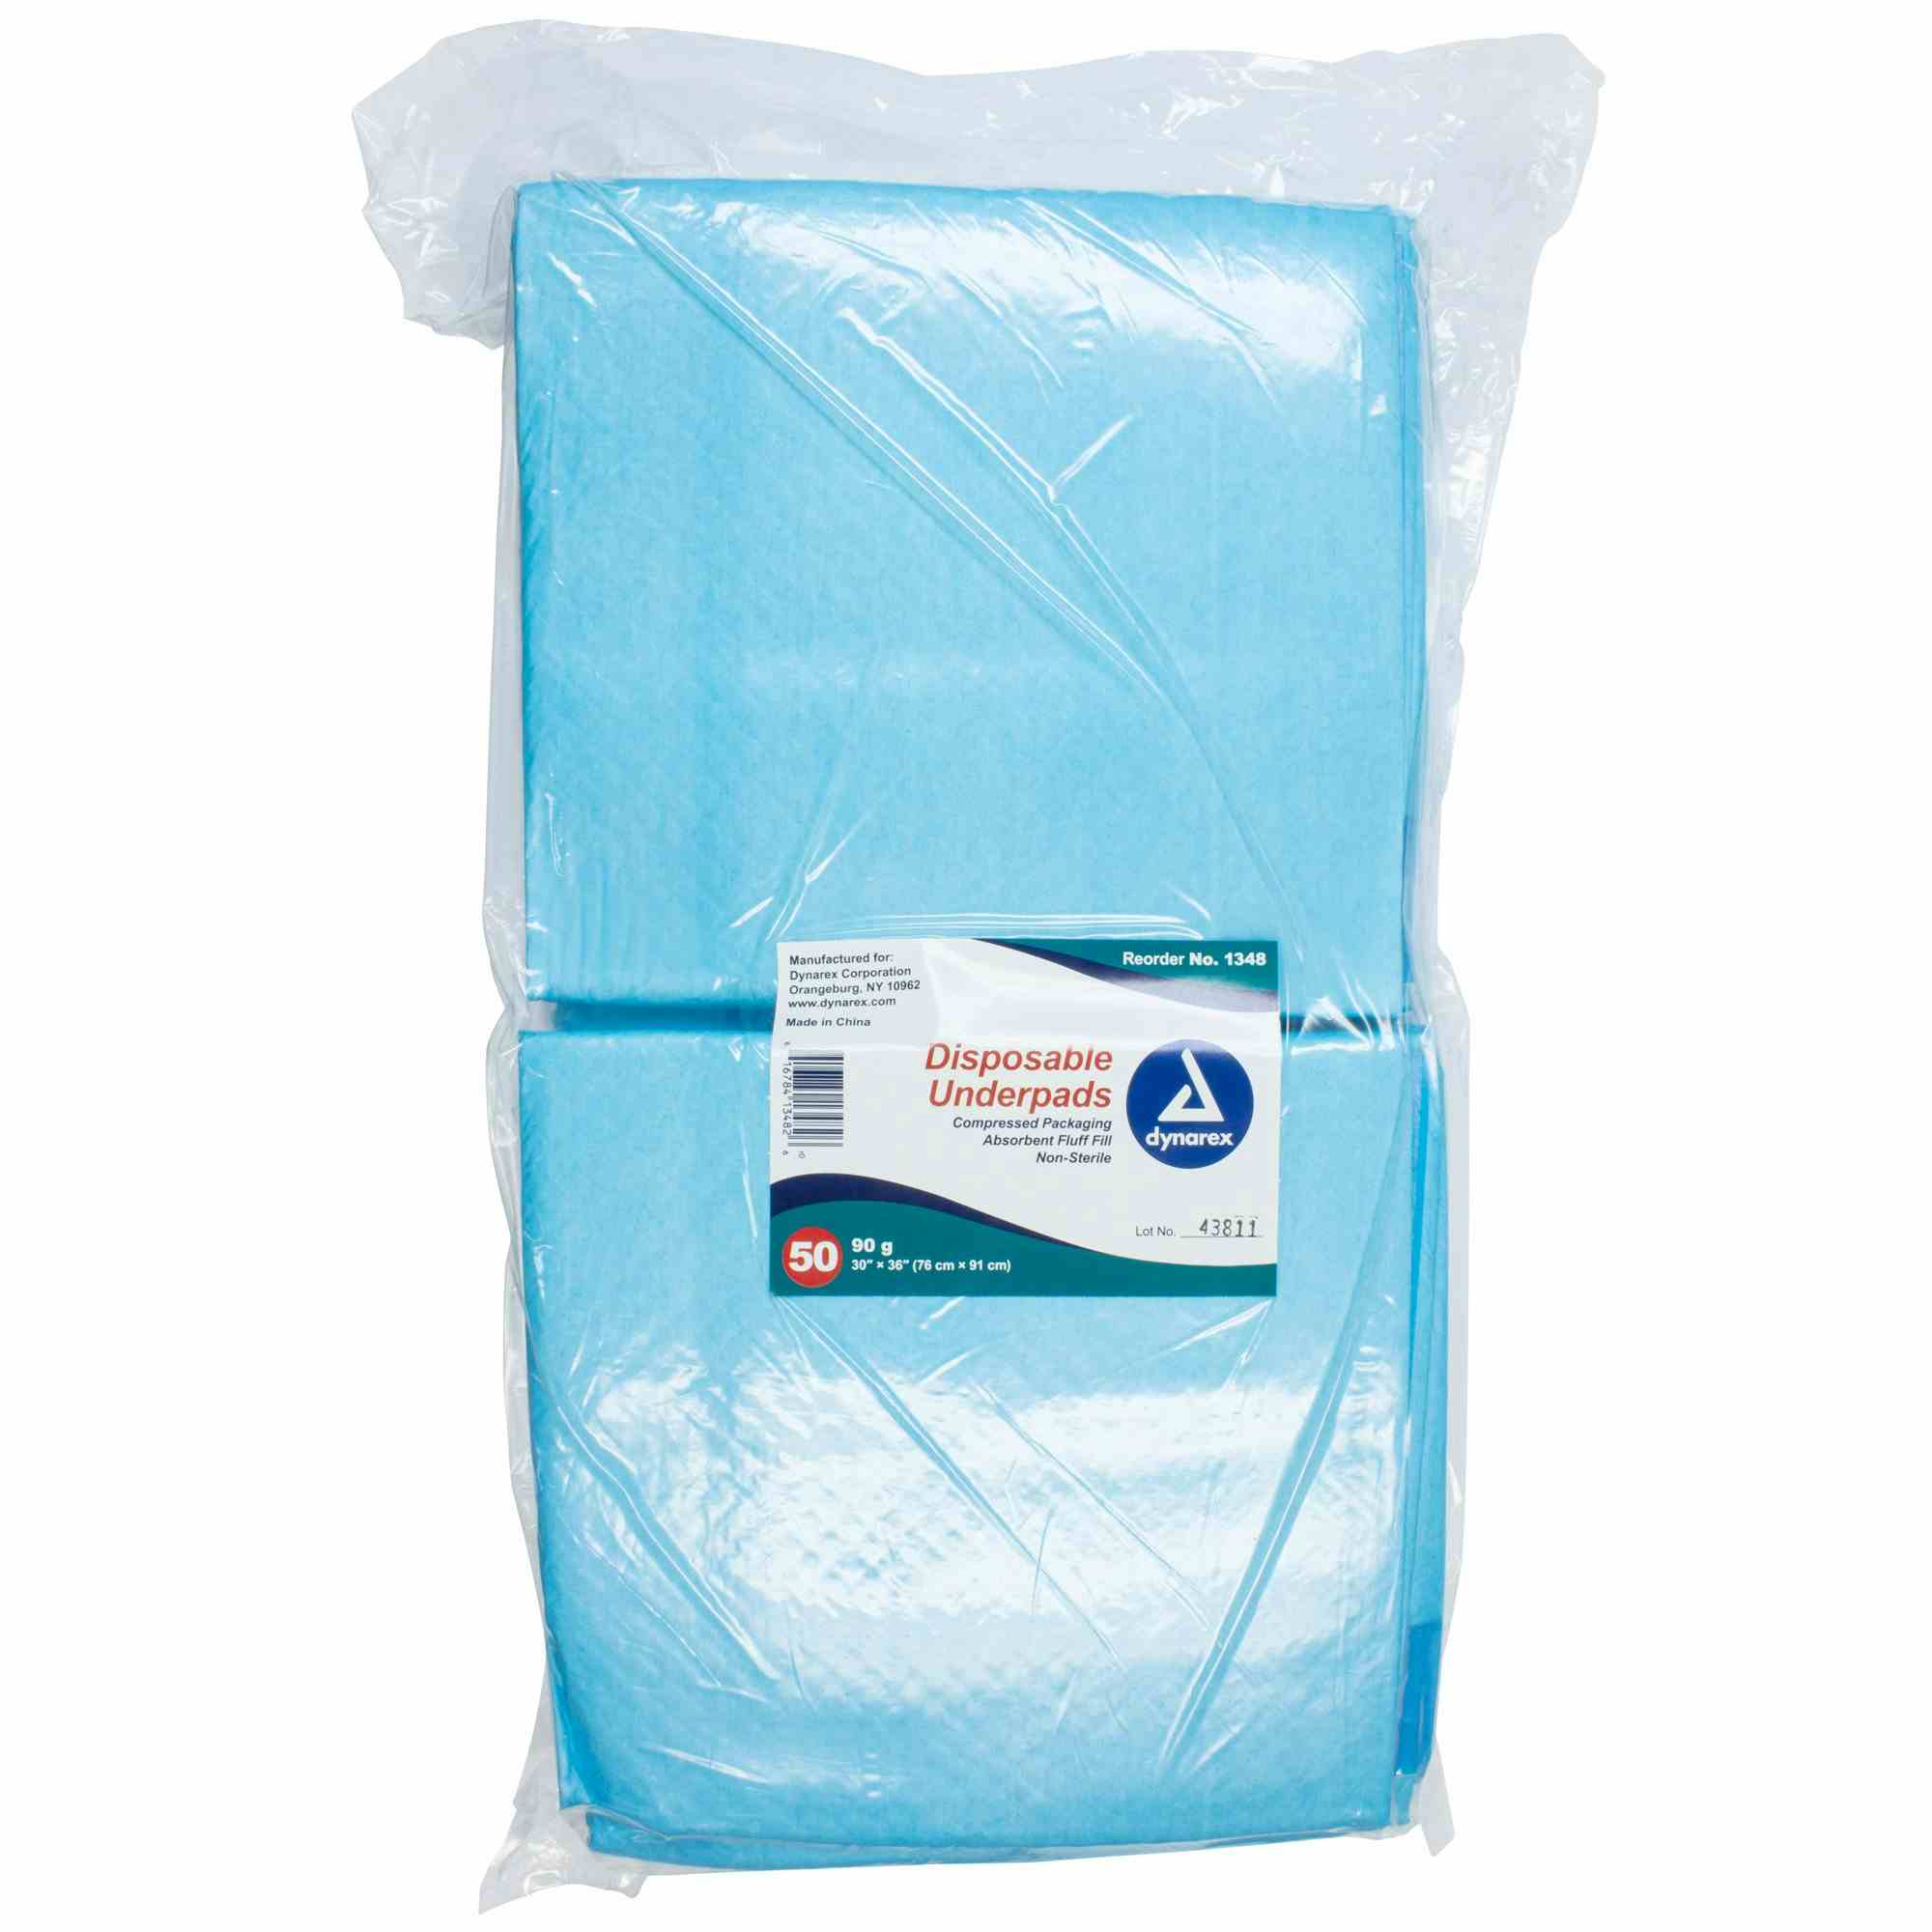 Dynarex Disposable Underpad, Heavy Absorbency, 1348, 30 X 36" - Case of 100 (2 Packs)